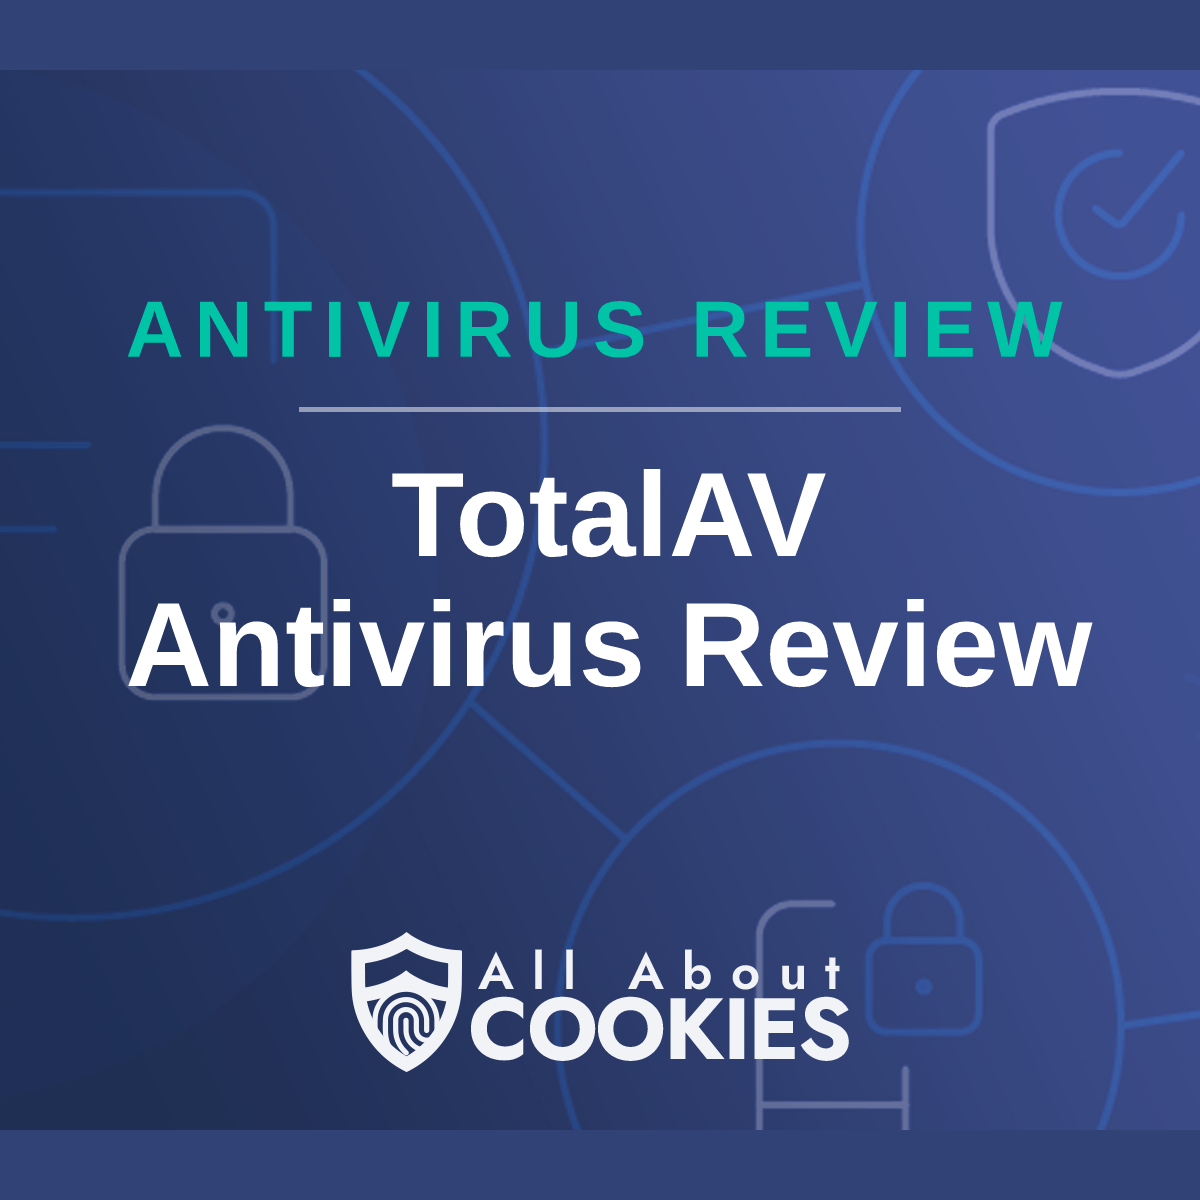 A blue background with images of locks and shields with the text "TotalAV Antivirus Review" and the All About Cookies logo. 